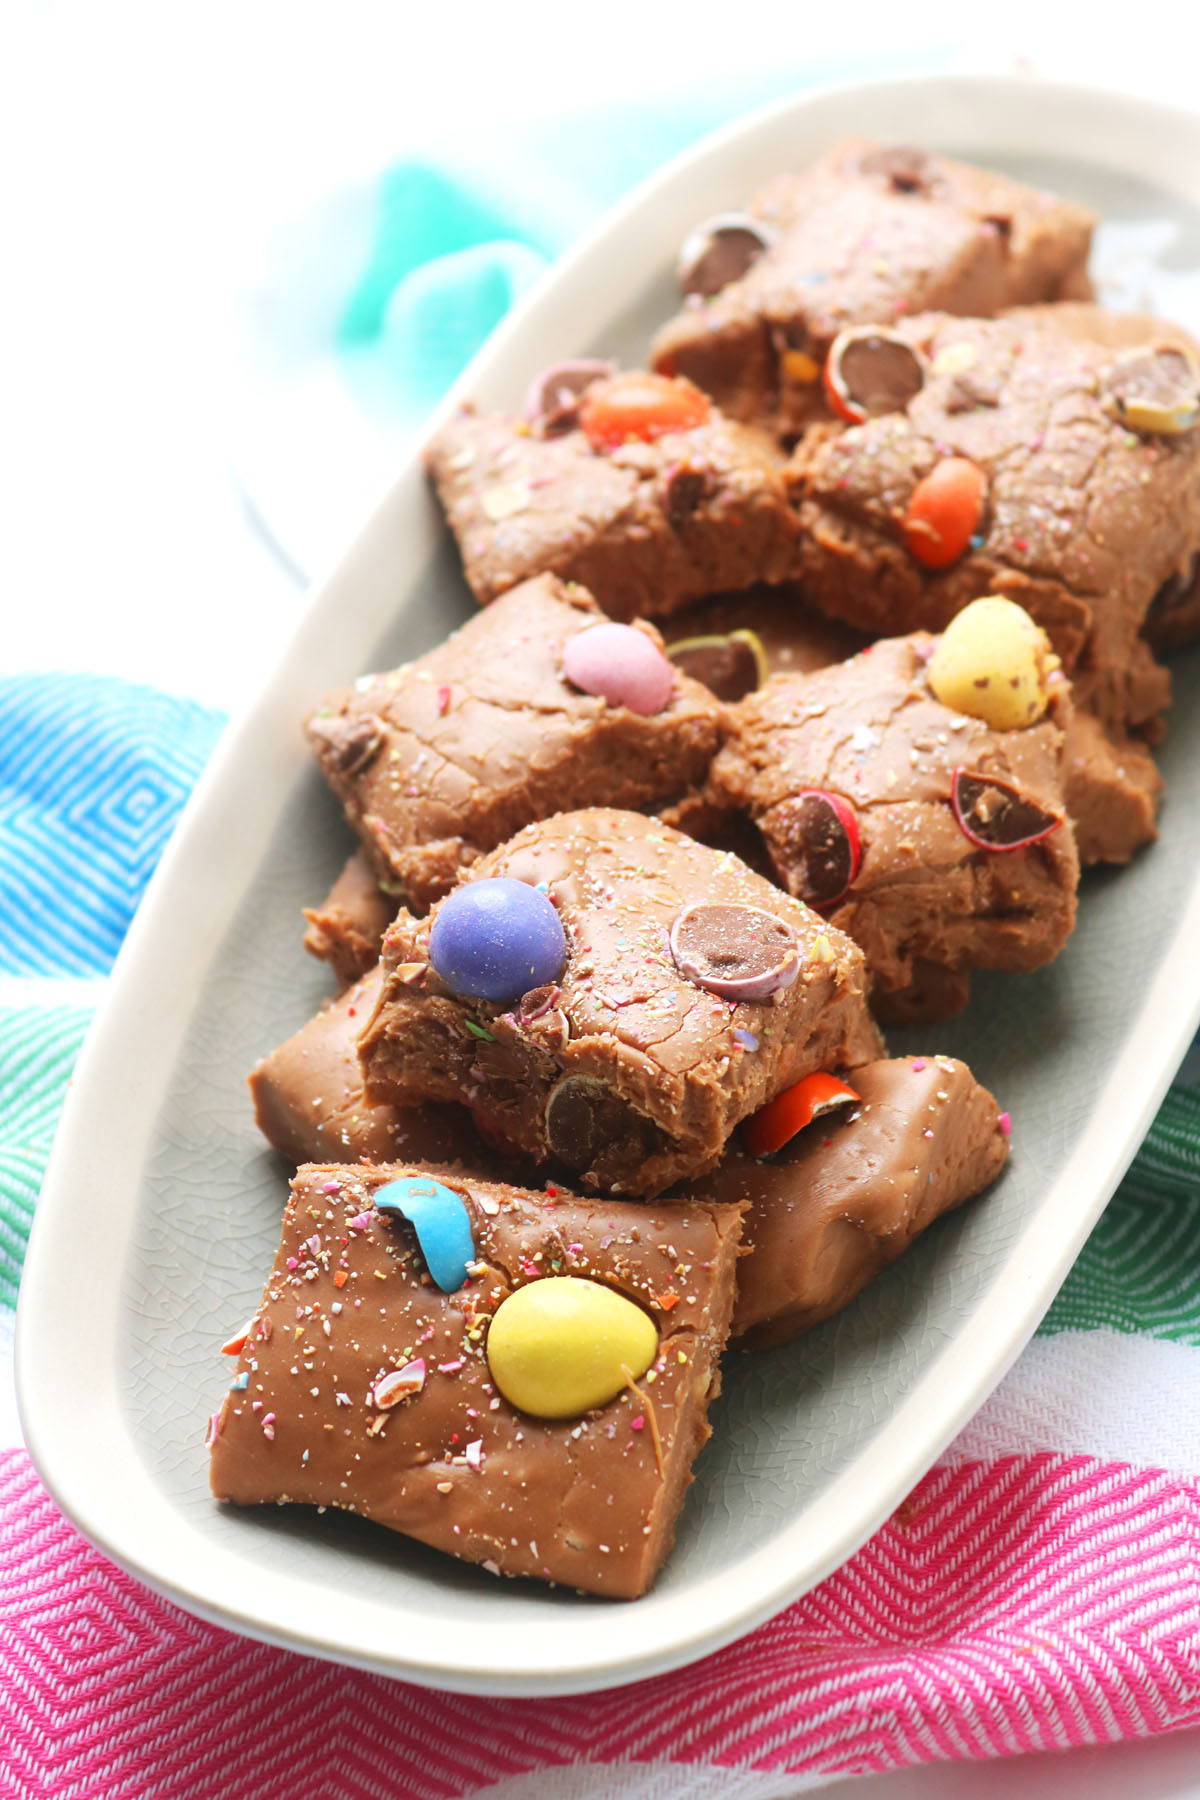 This chocolate Easter fudge is made with chocolate, condensed milk, butter and icing sugar. Add your favourite Easter candies!